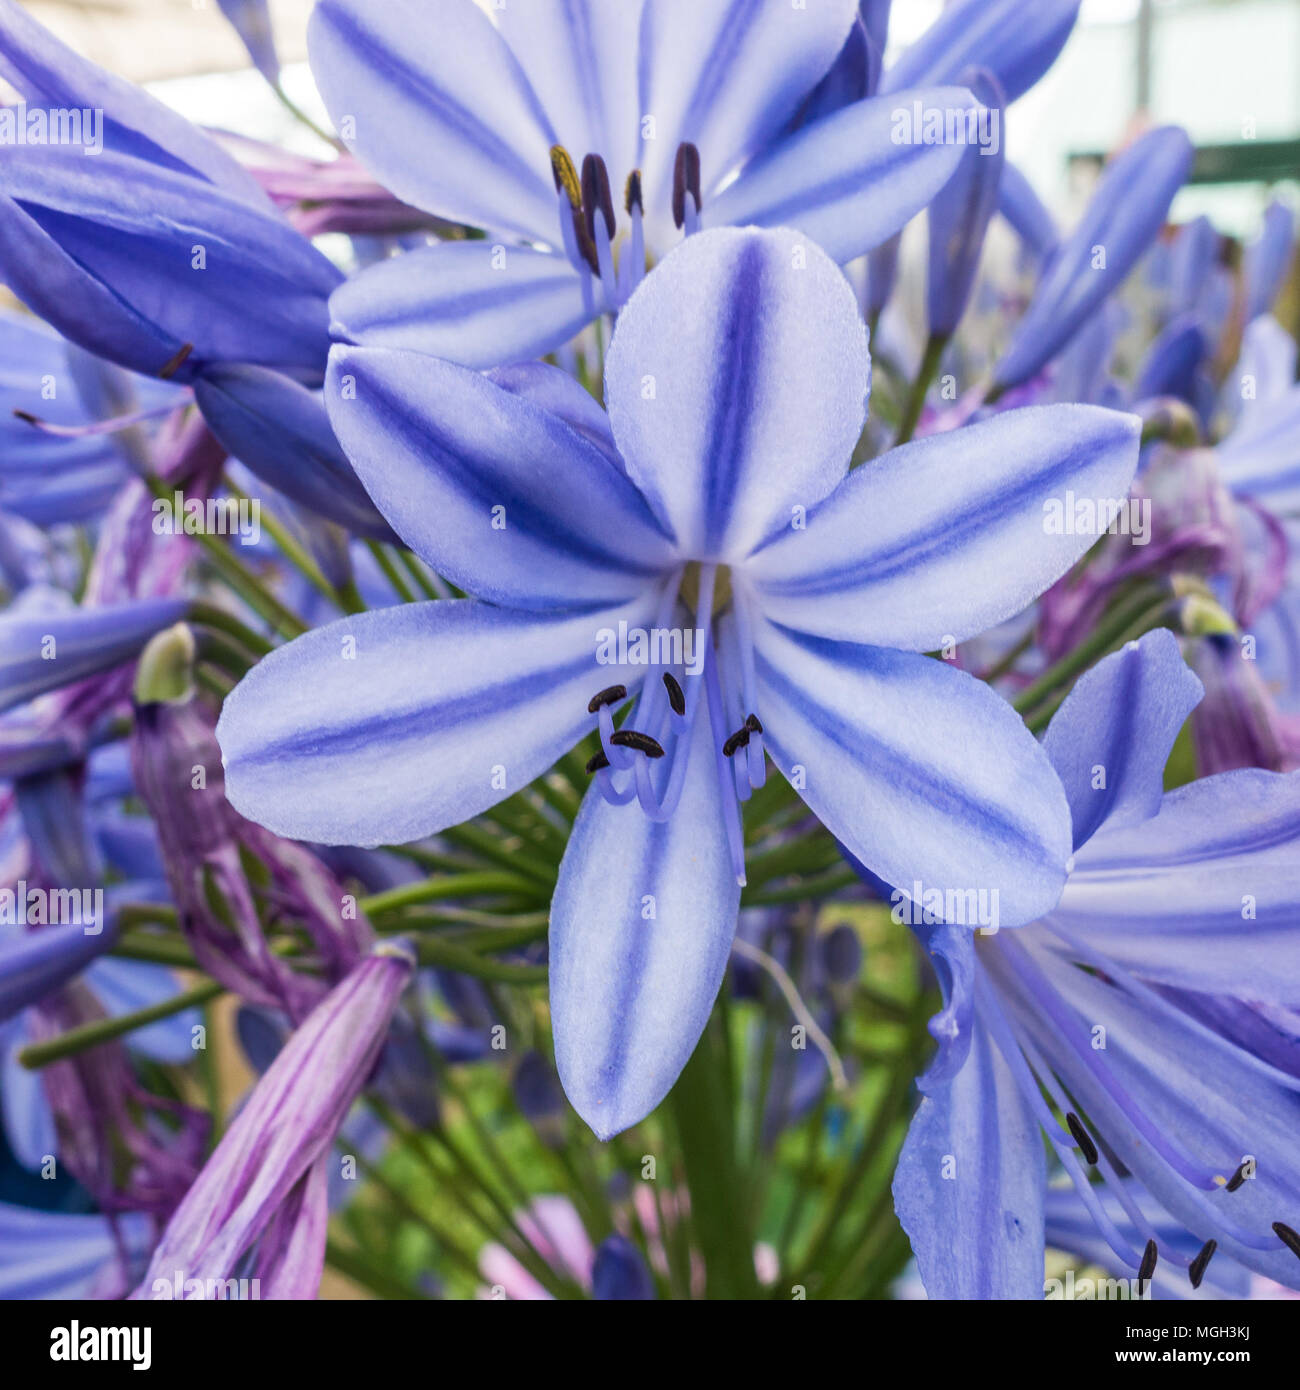 A macro shot of the blooms at the top of an agapanthus flower head. Stock Photo